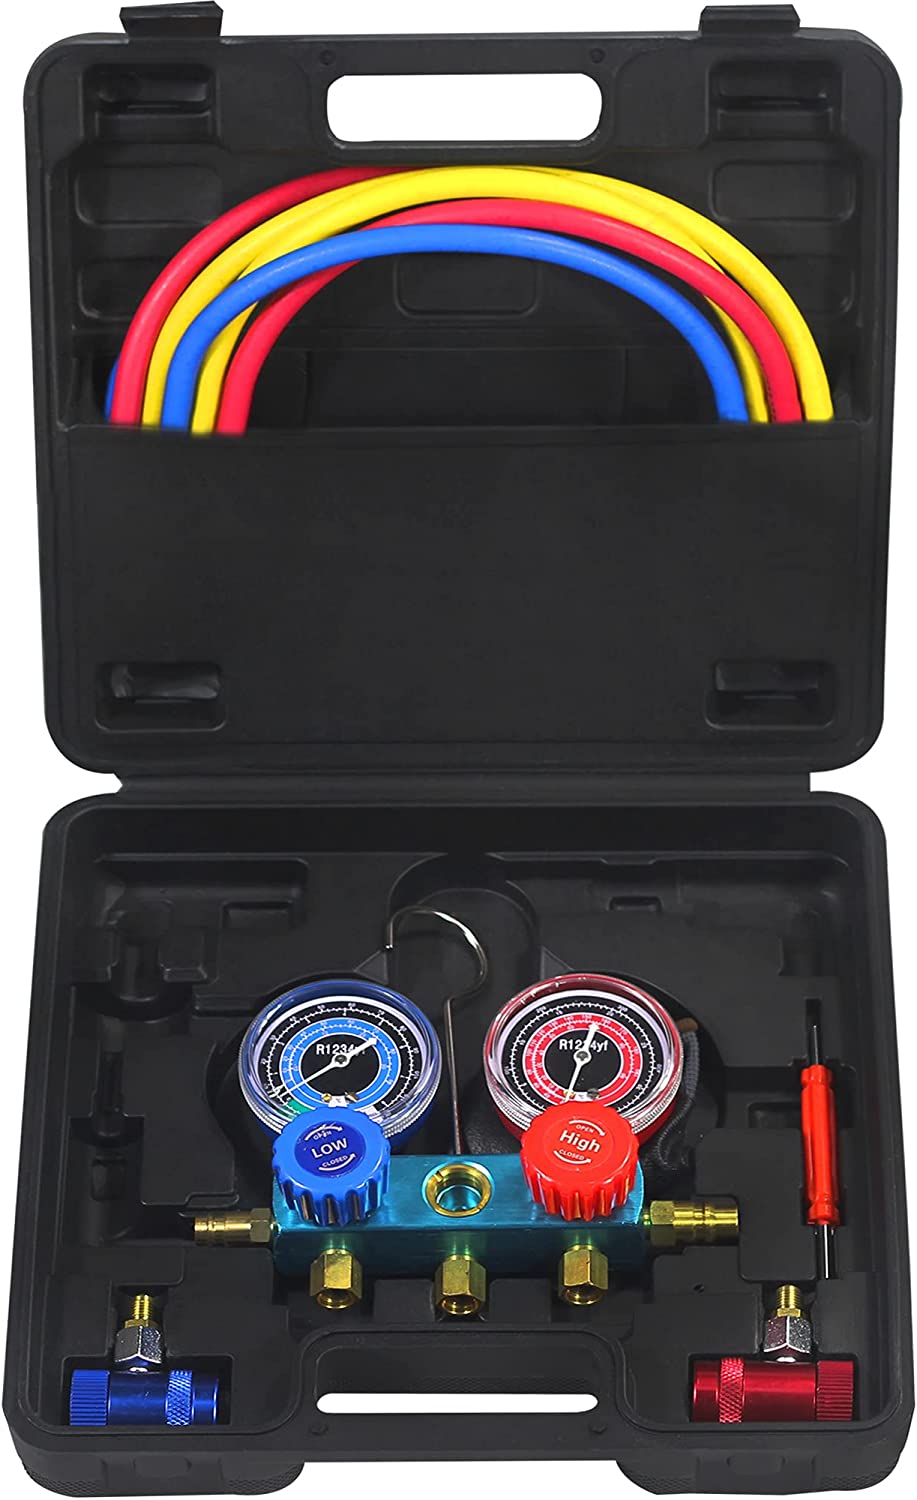 Professional Gauge Set for 1234YF Systems, AC Tools